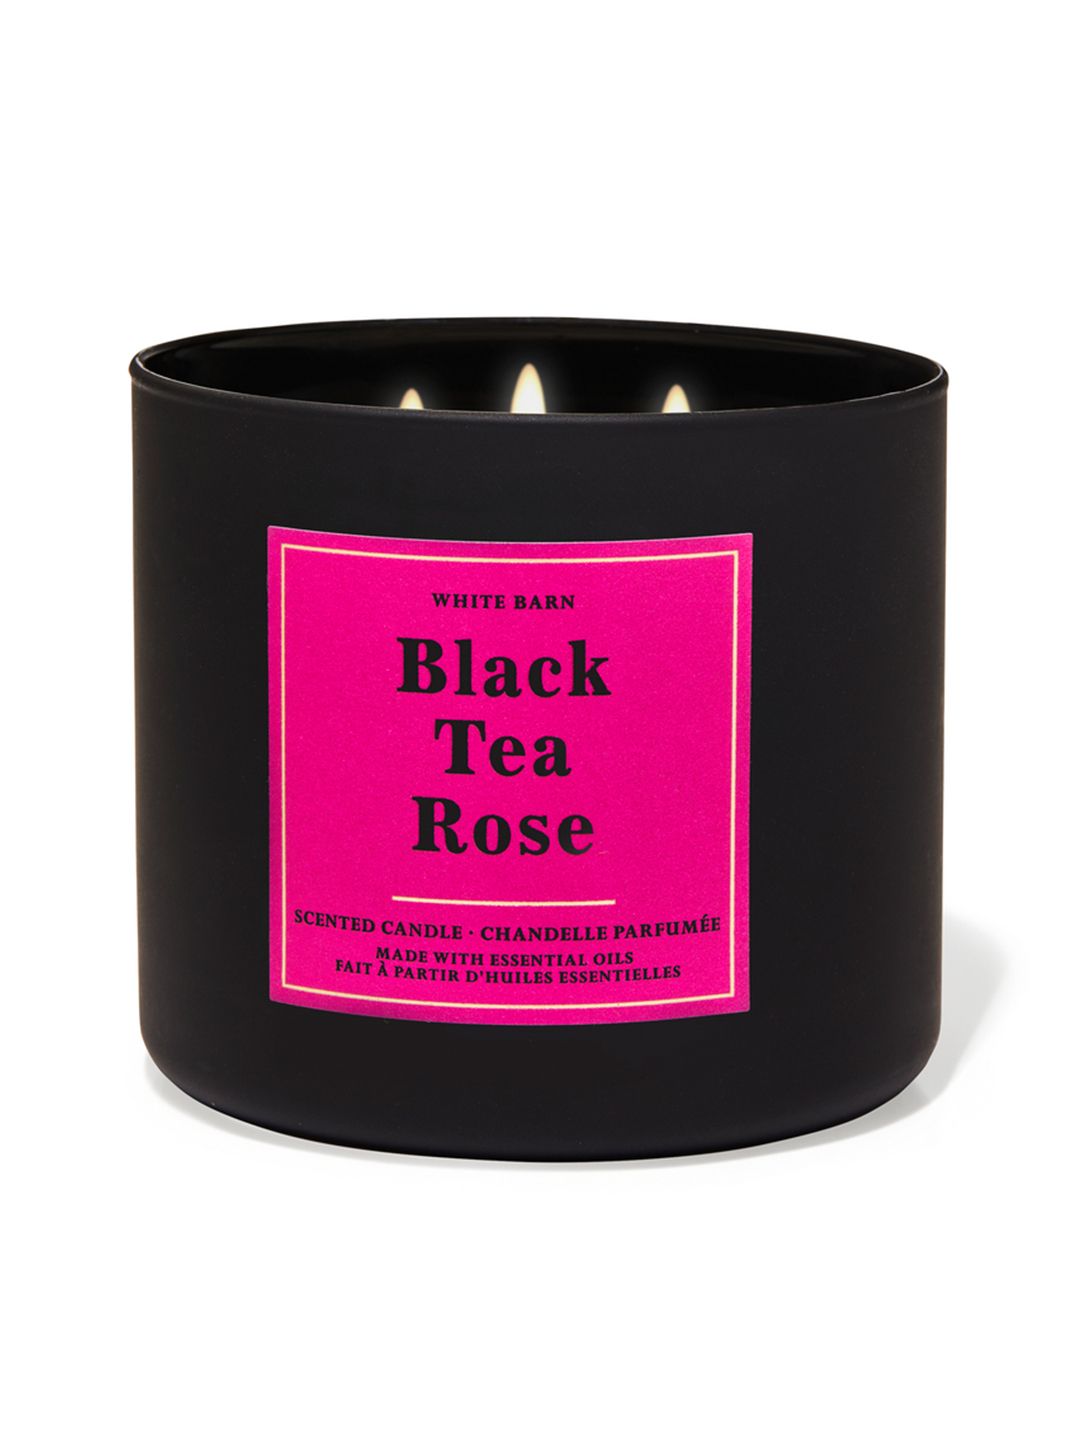 Bath & Body Works White Barn Black Tea Rose 3-Wick Scented Candle - 411 g Price in India